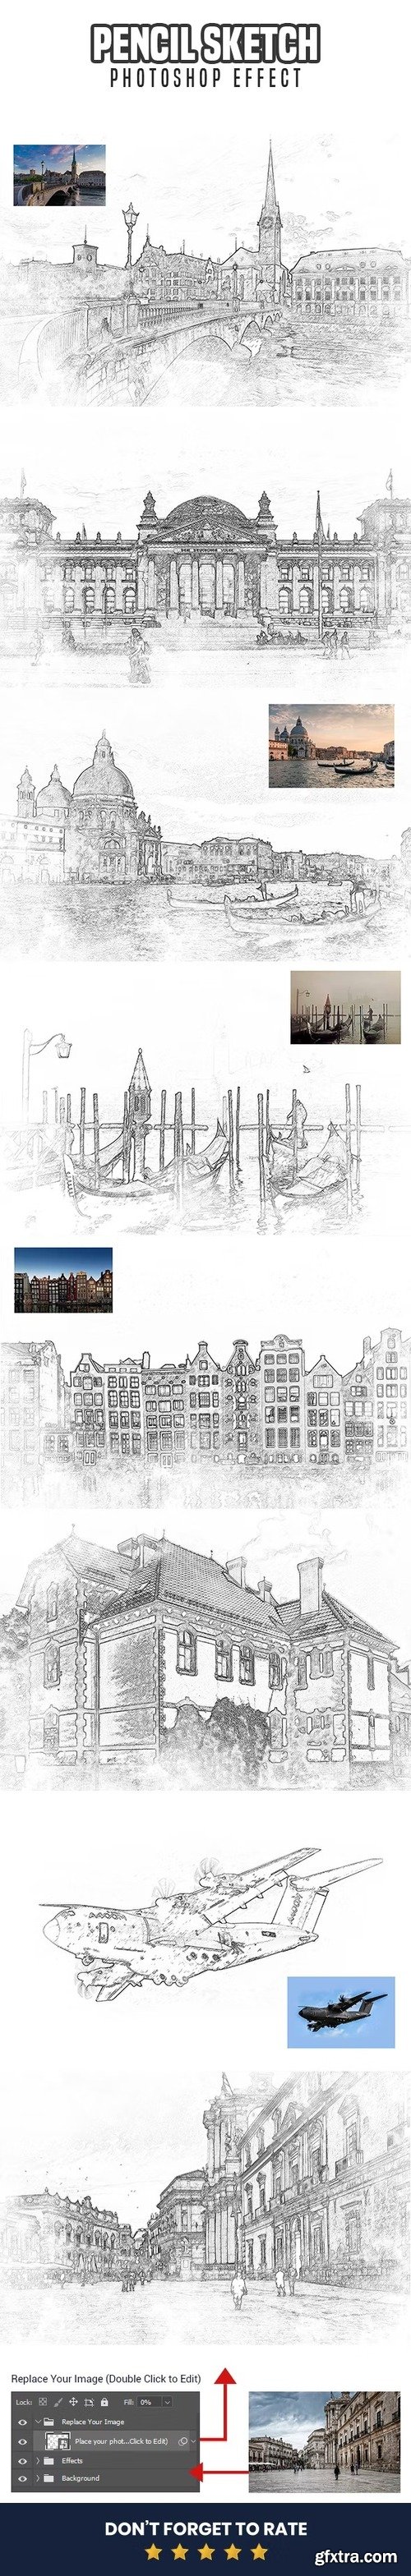 GraphicRiver - Pencil Sketch Drawing Photoshop Effect 40230918